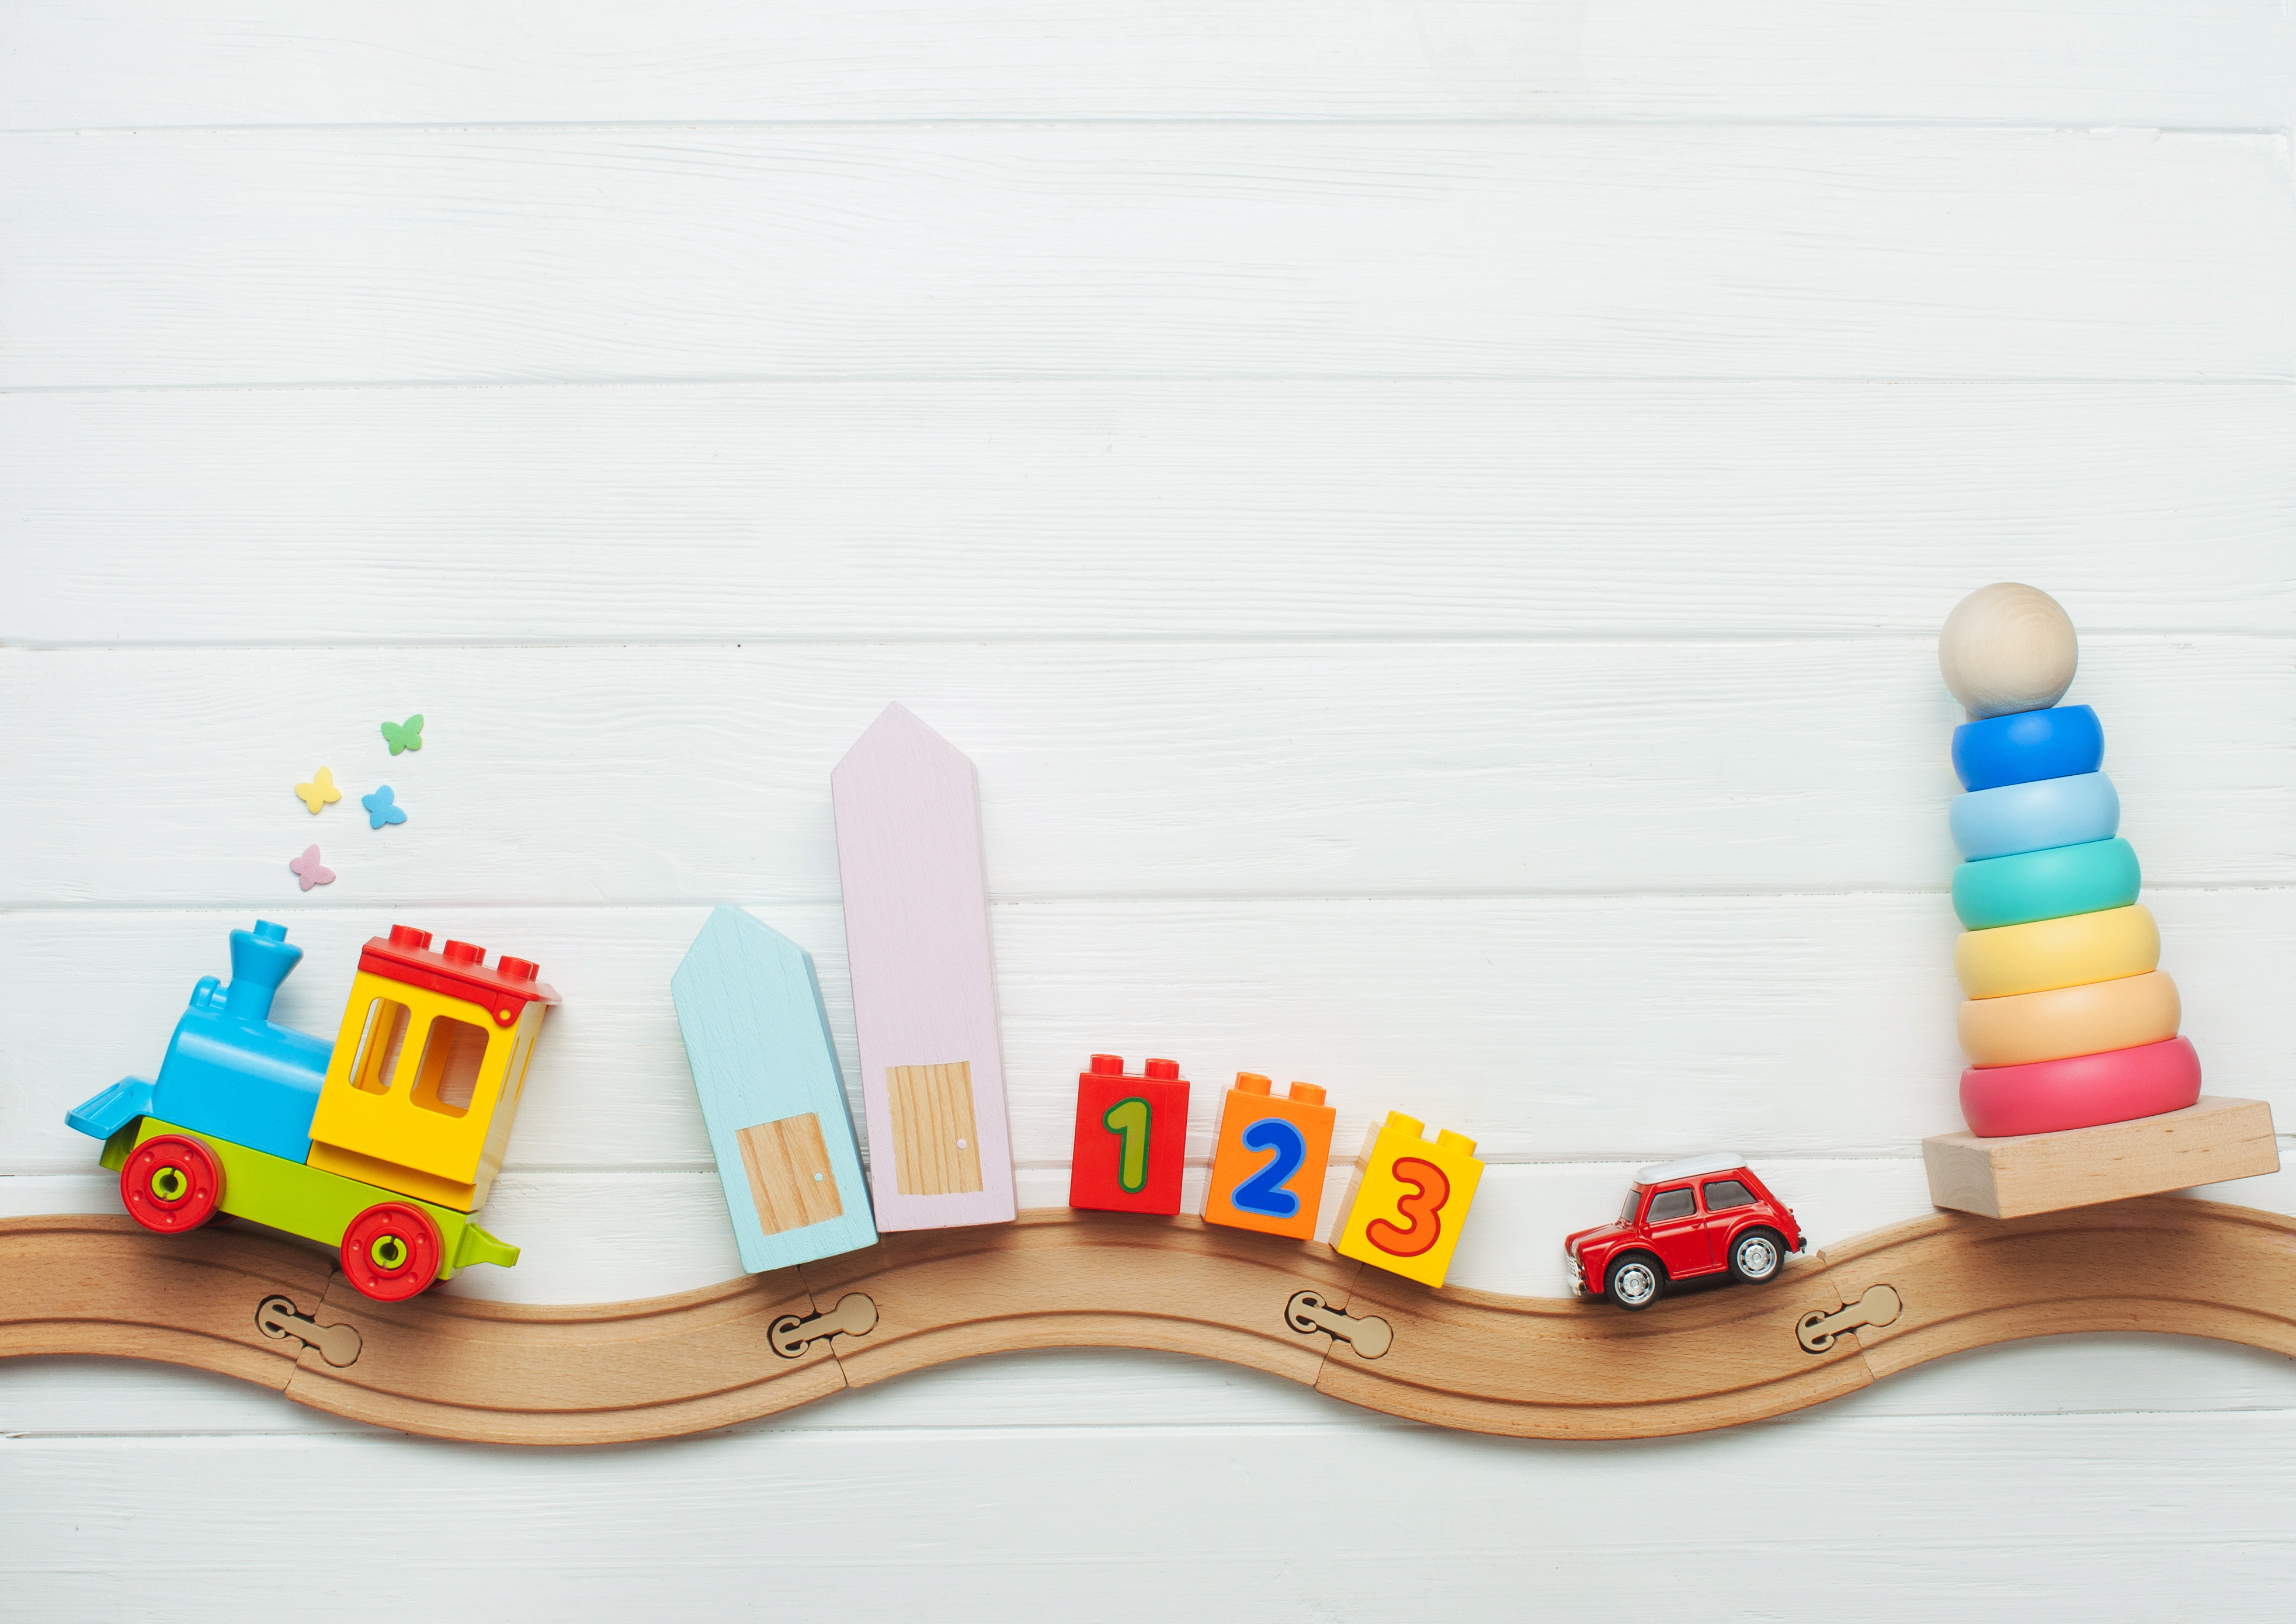 Picture of toys on a wooden train track.